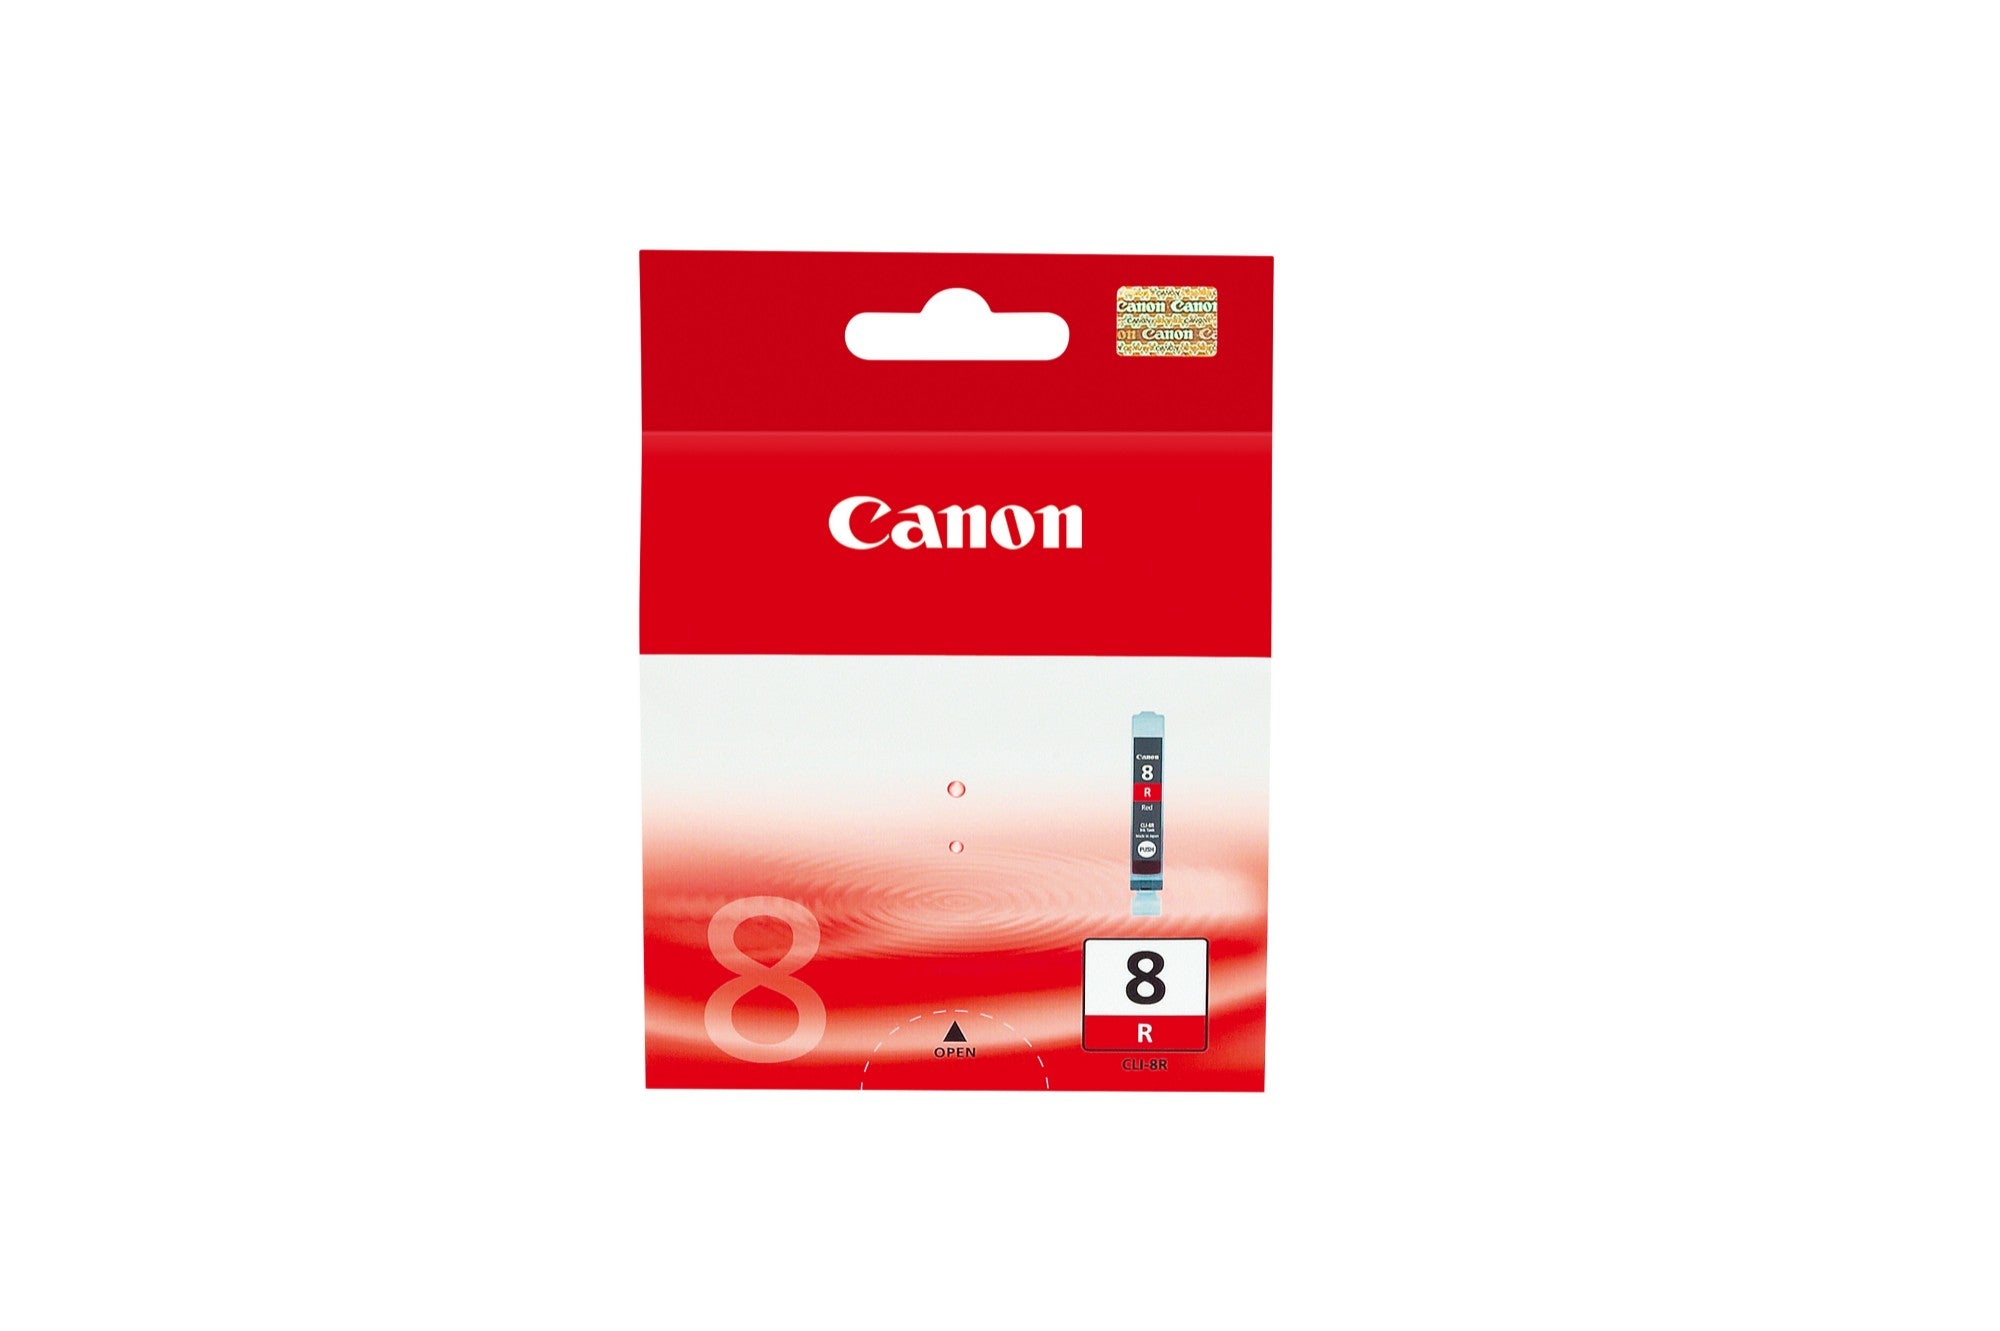 Canon 0626B001/CLI-8R Ink cartridge red, 5.79K pages 13ml for Canon Pixma Pro 9000